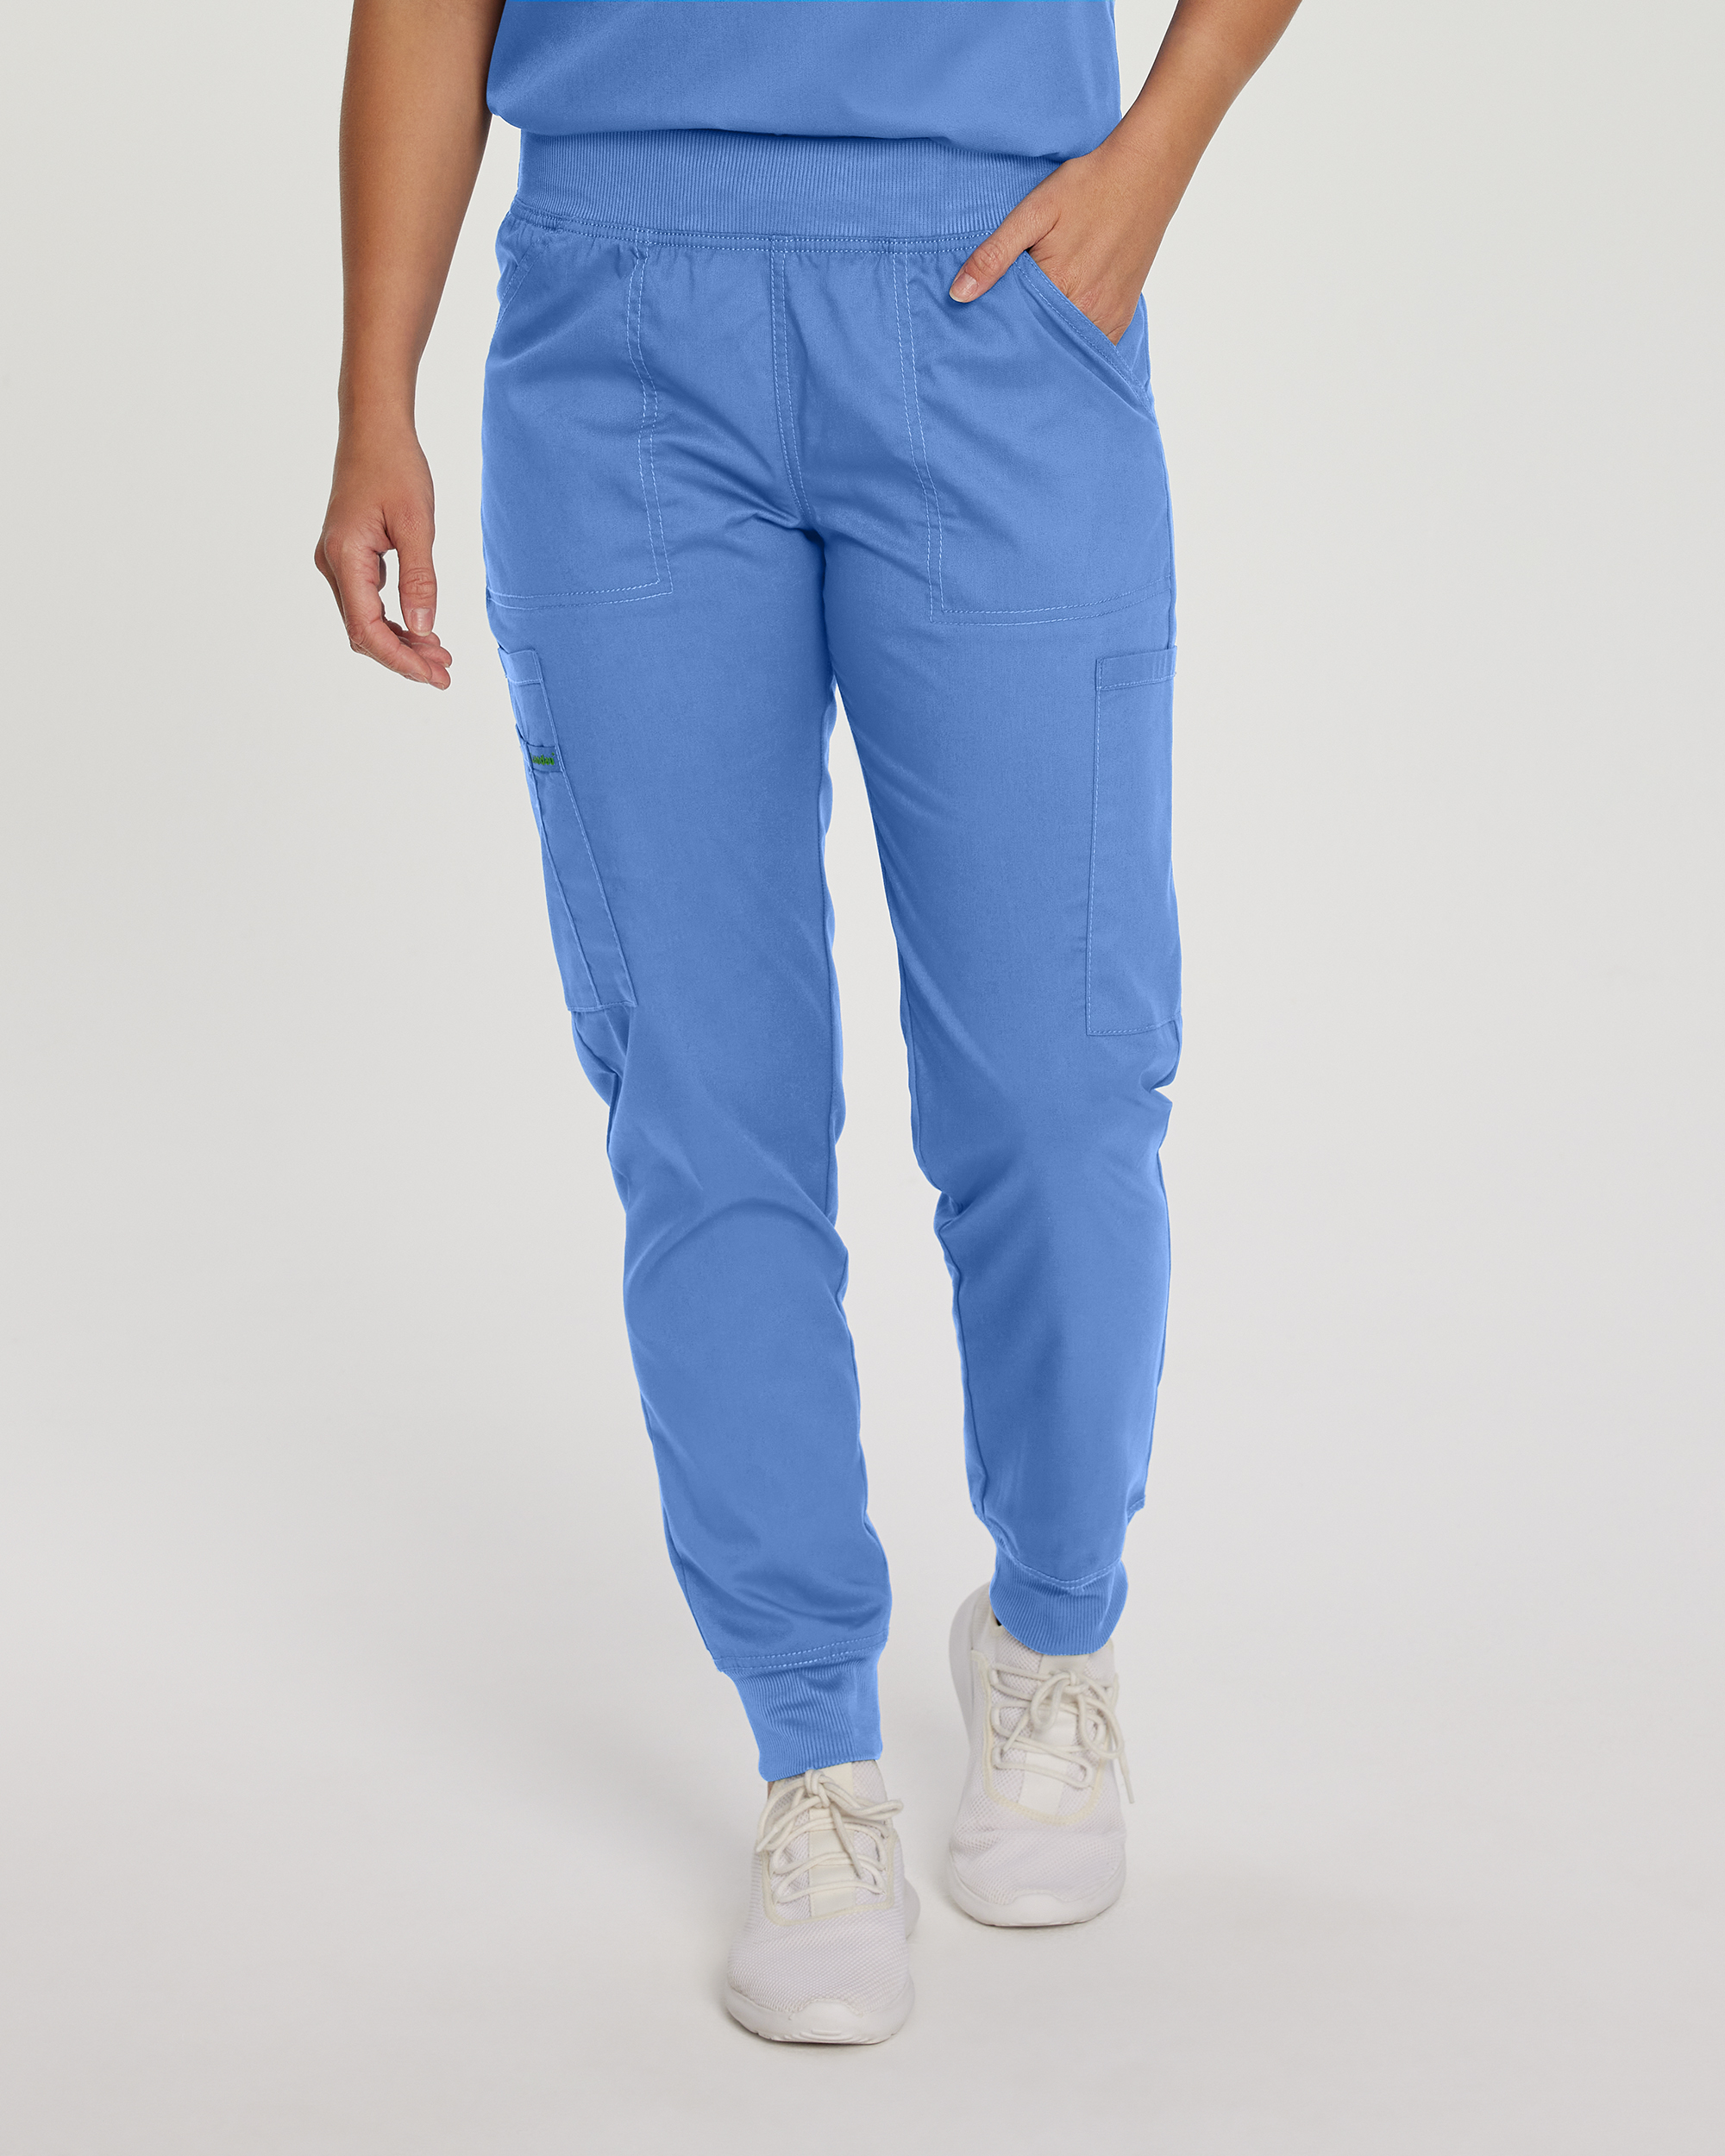 What are the fit features of these scrub pants?